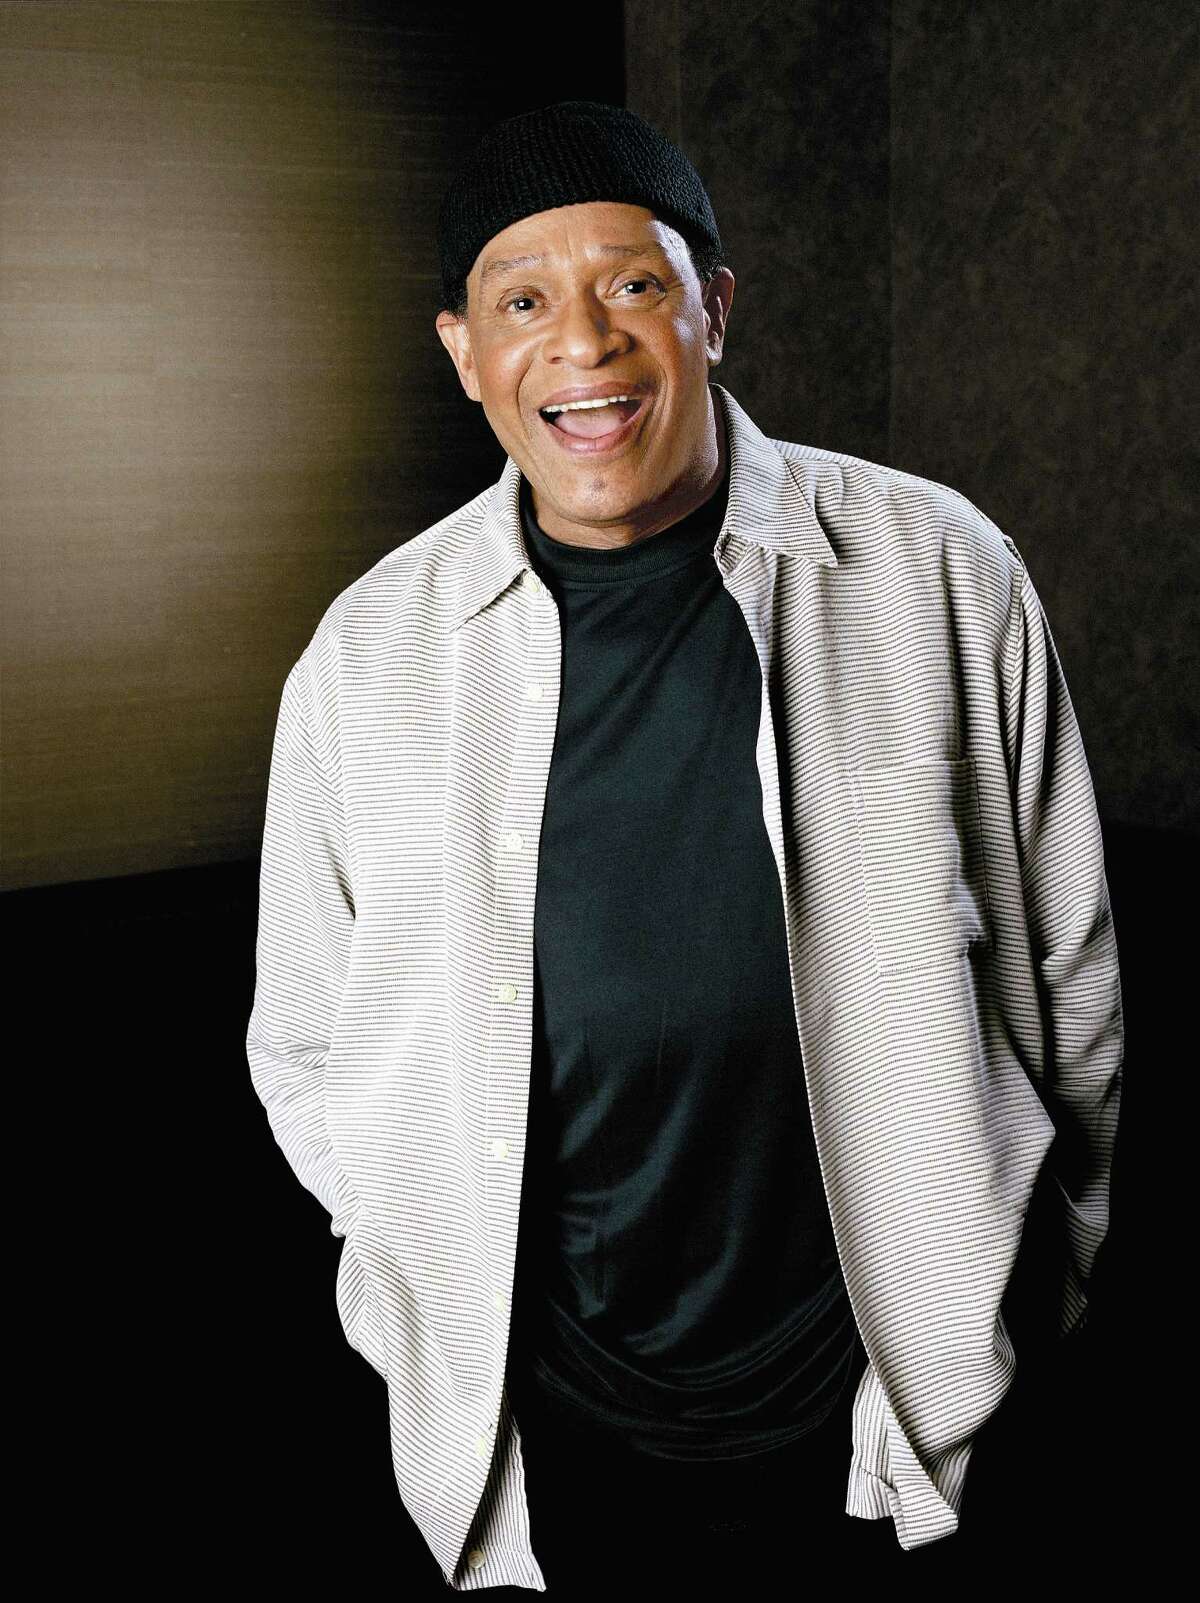 Before performing this weekend, Al Jarreau will hold a master class at HSPVA and be inducted into into the KTSU Jazz Hall of Fame.